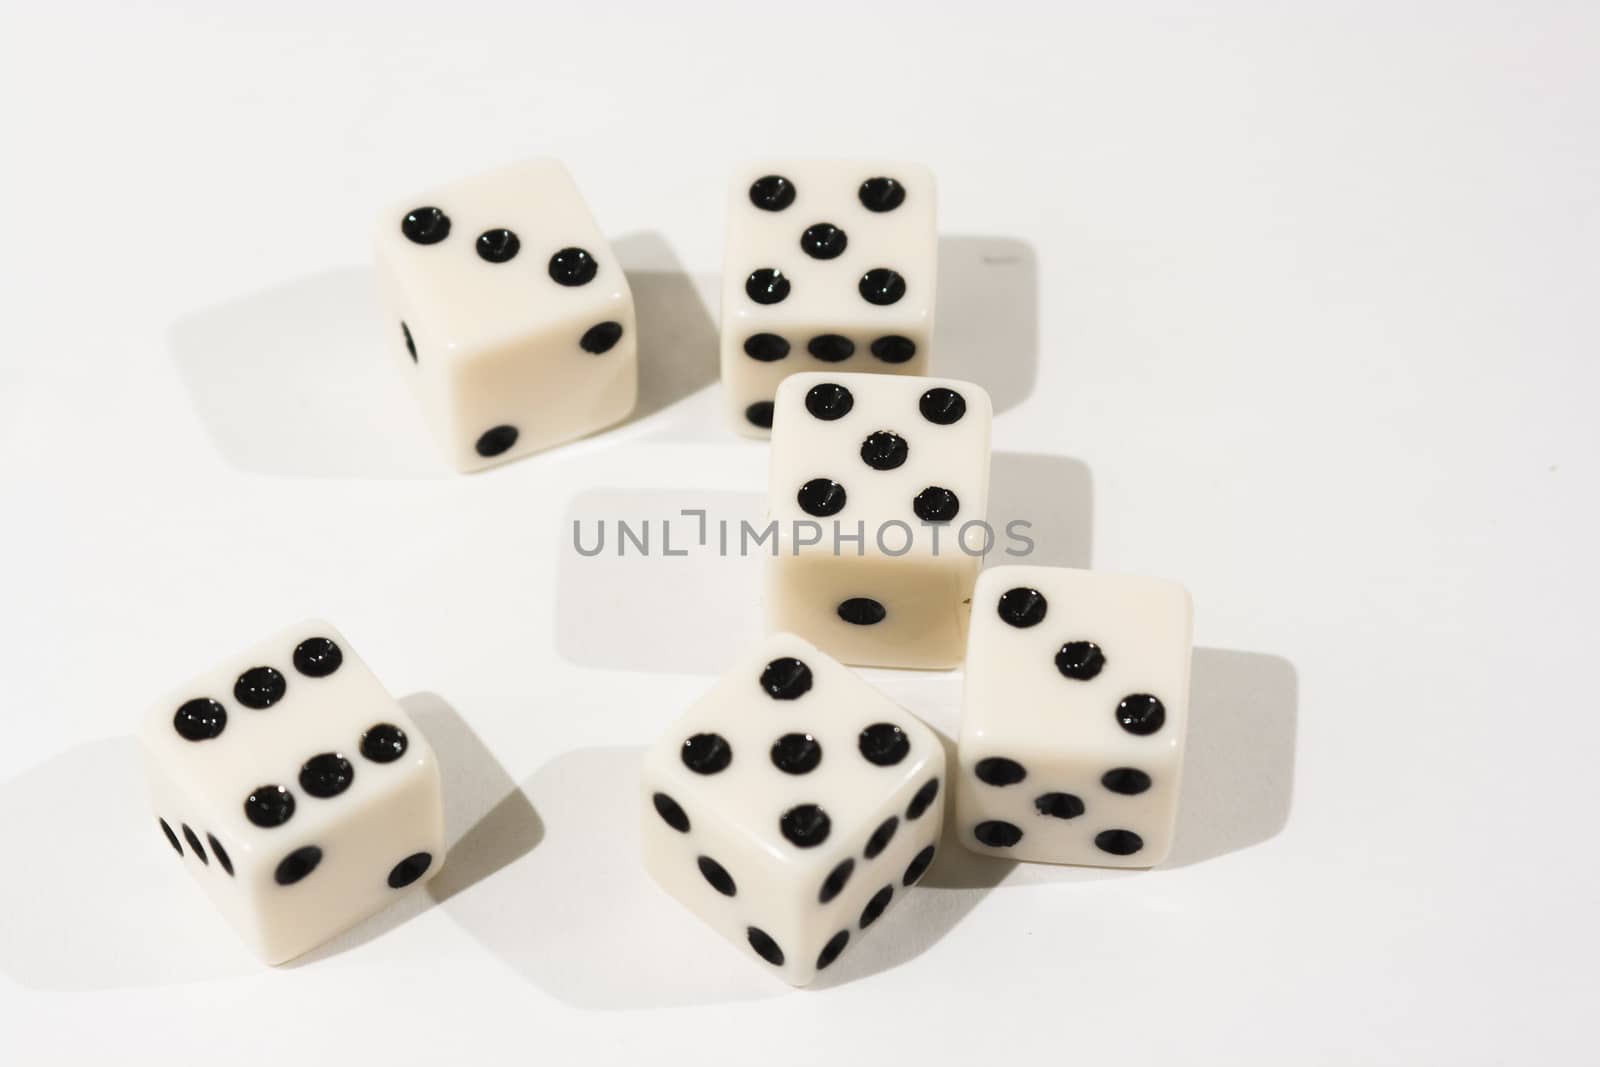 White dice shot against a white background